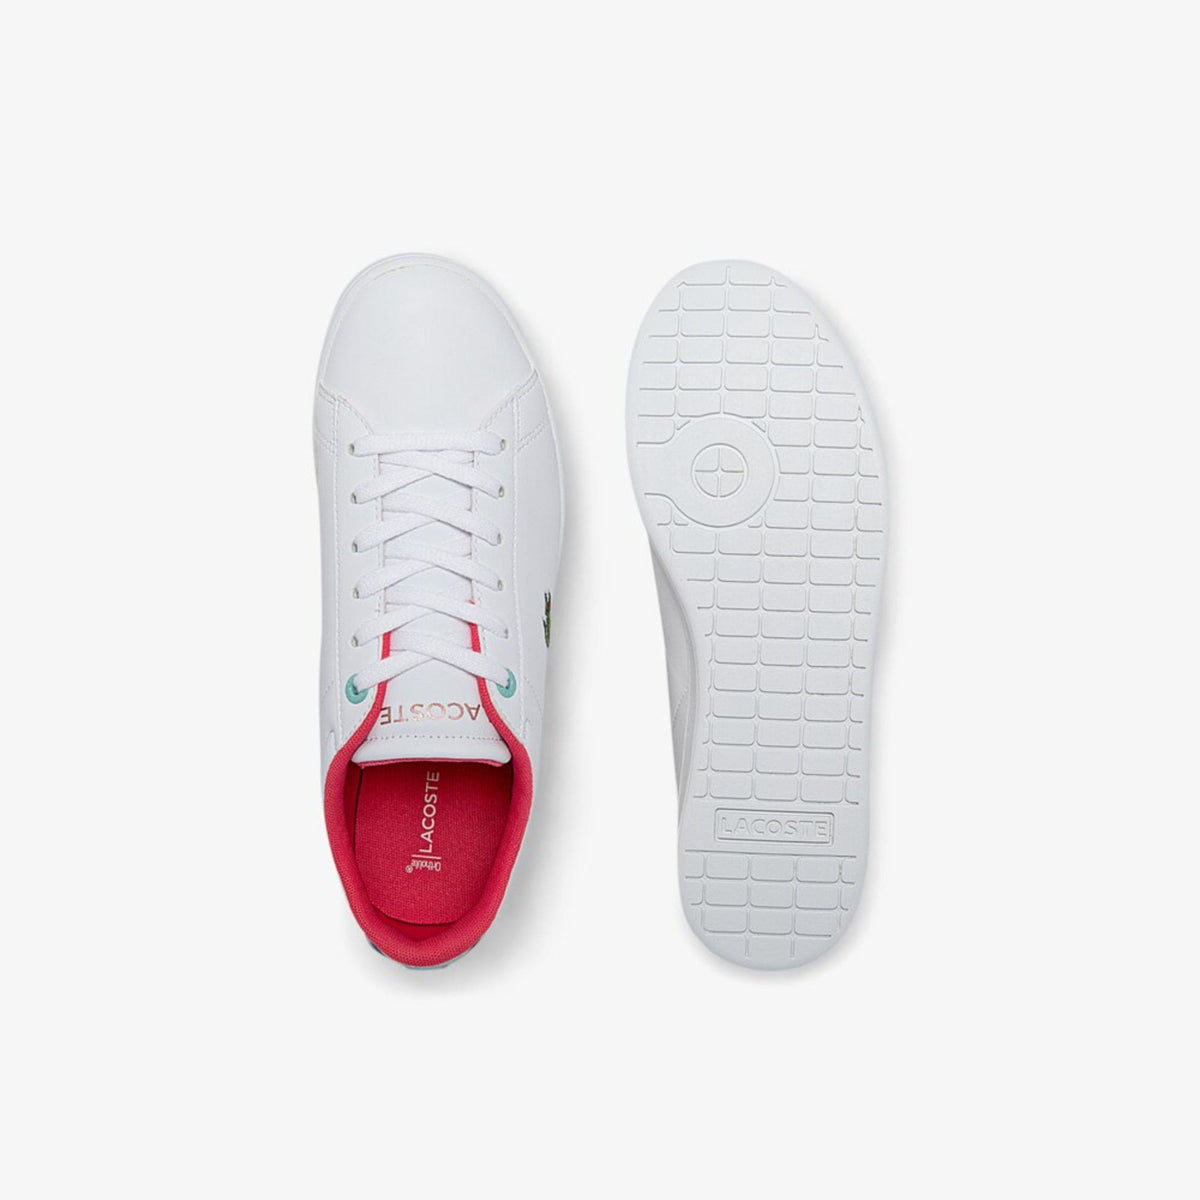 Lacoste Shoes Carnaby Sneakers Pink